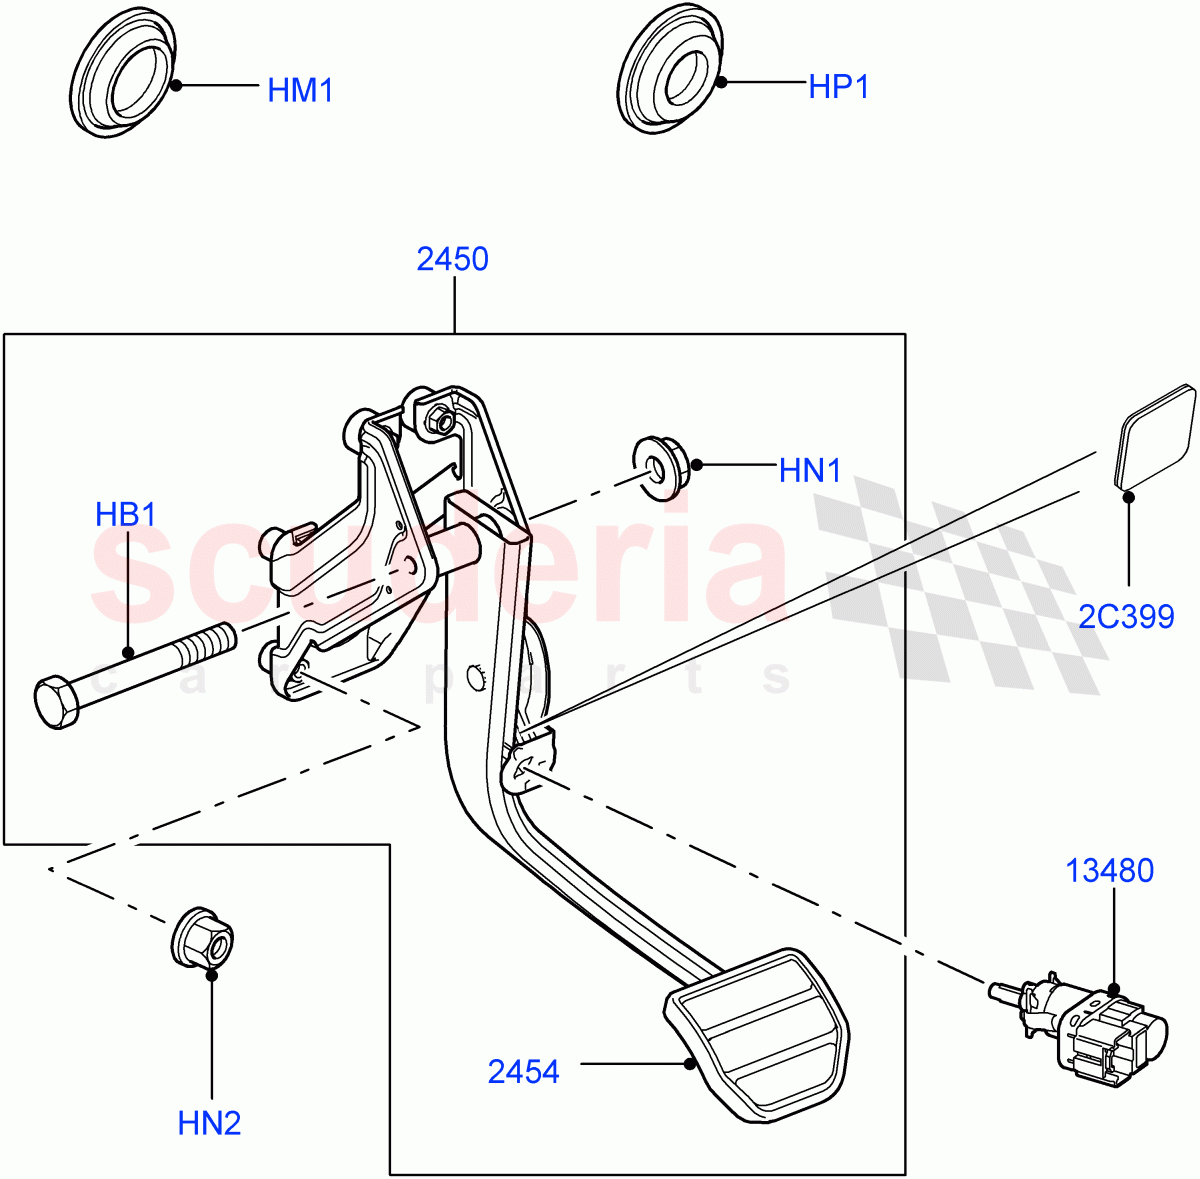 Brake And Clutch Controls(Automatic Transmission)((V)FROMAA000001) of Land Rover Land Rover Discovery 4 (2010-2016) [5.0 OHC SGDI NA V8 Petrol]